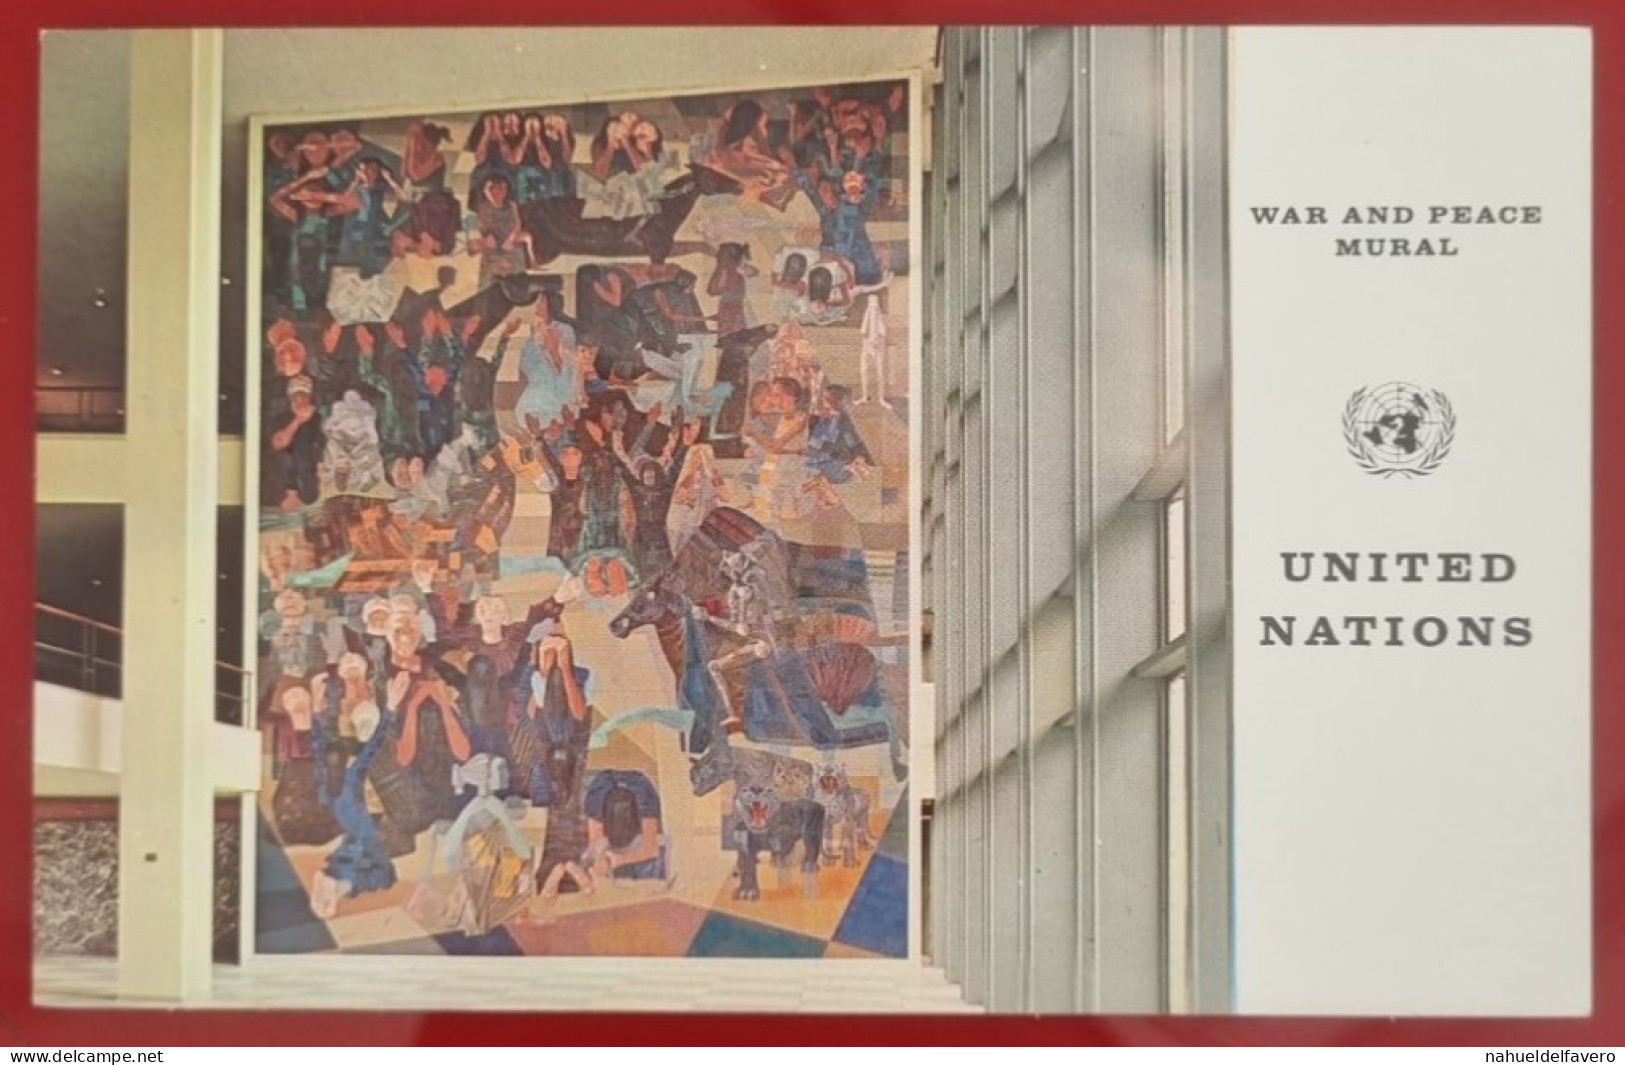 Uncirculated Postcard - USA - NY, NEW YORK CITY - UNITED NATIONS, ONE OF THE TWO MURALS, "WAR" AND "PEACE" BY PORTINARI - Places